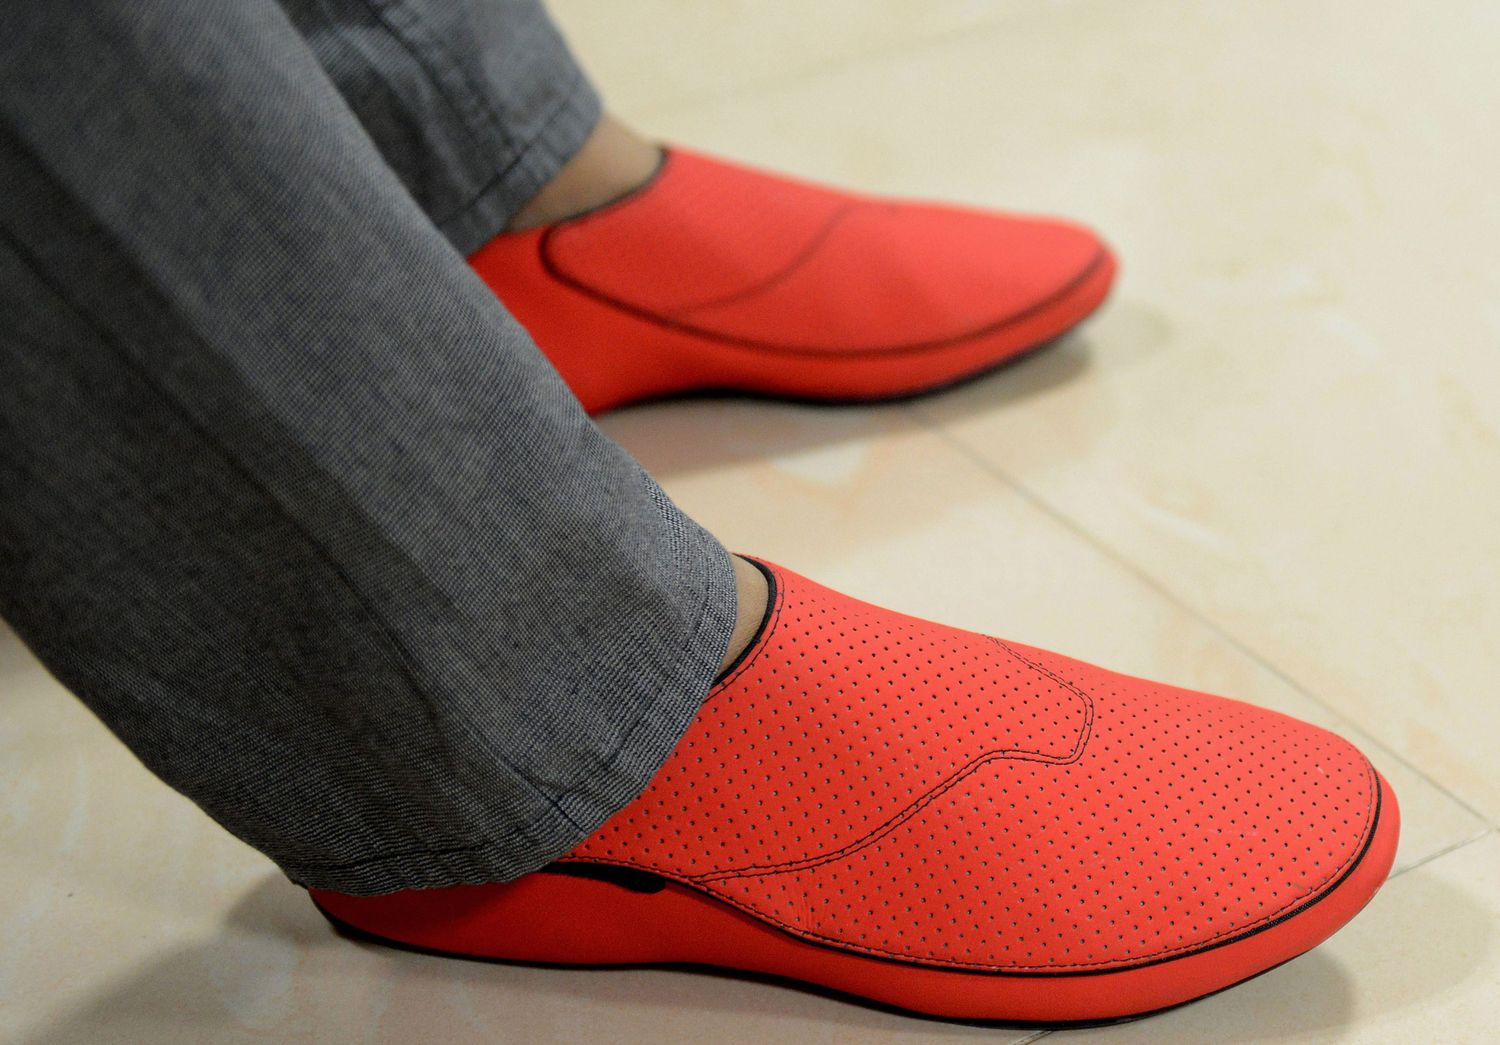 lechal-smart-shoes-vibrate-to-tell-you-where-to-walk